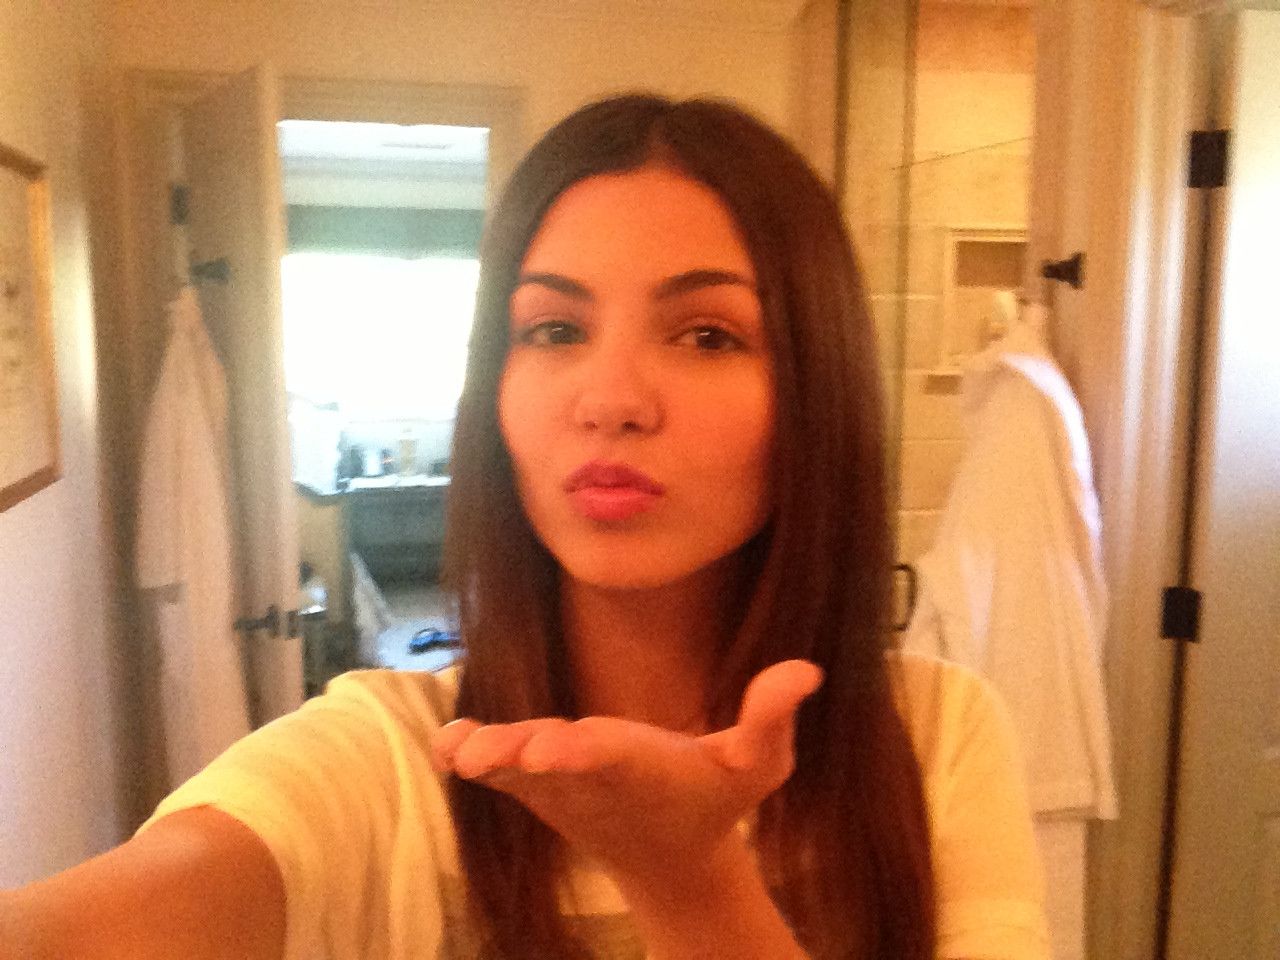 Victoria justice leaked images